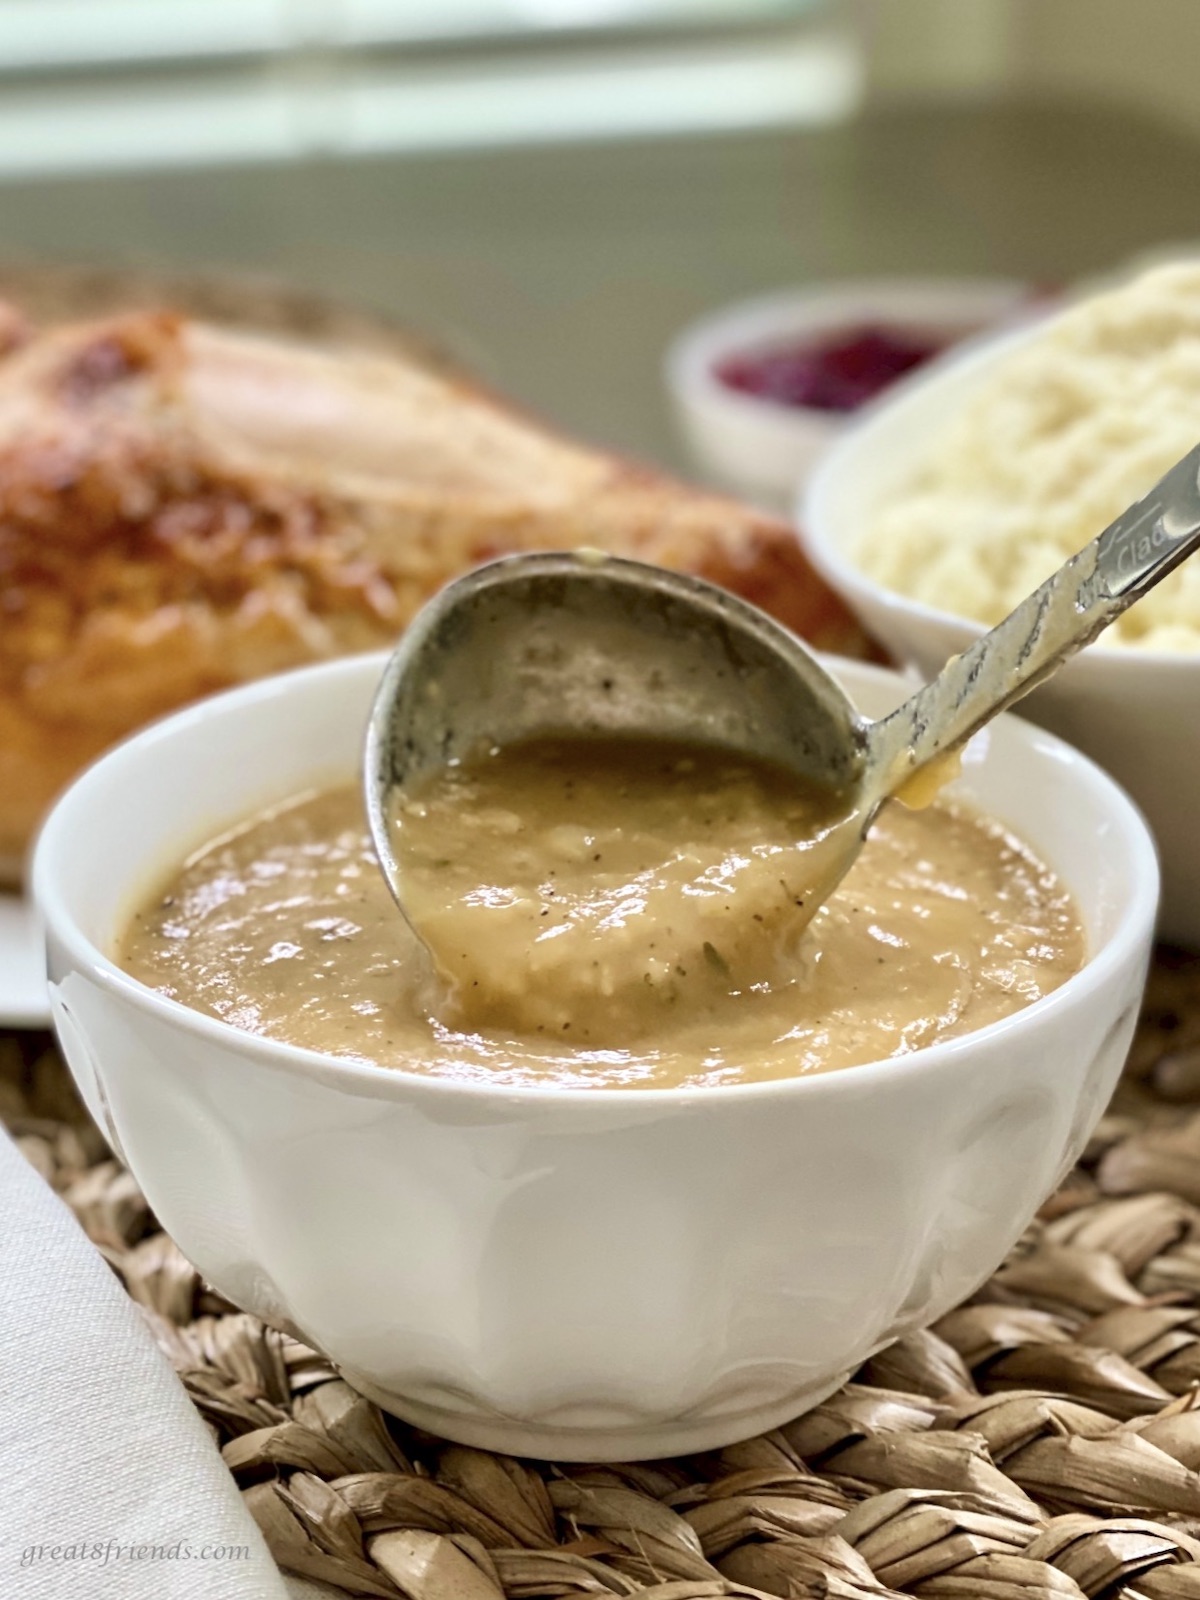 Gravy being served with a ladle.